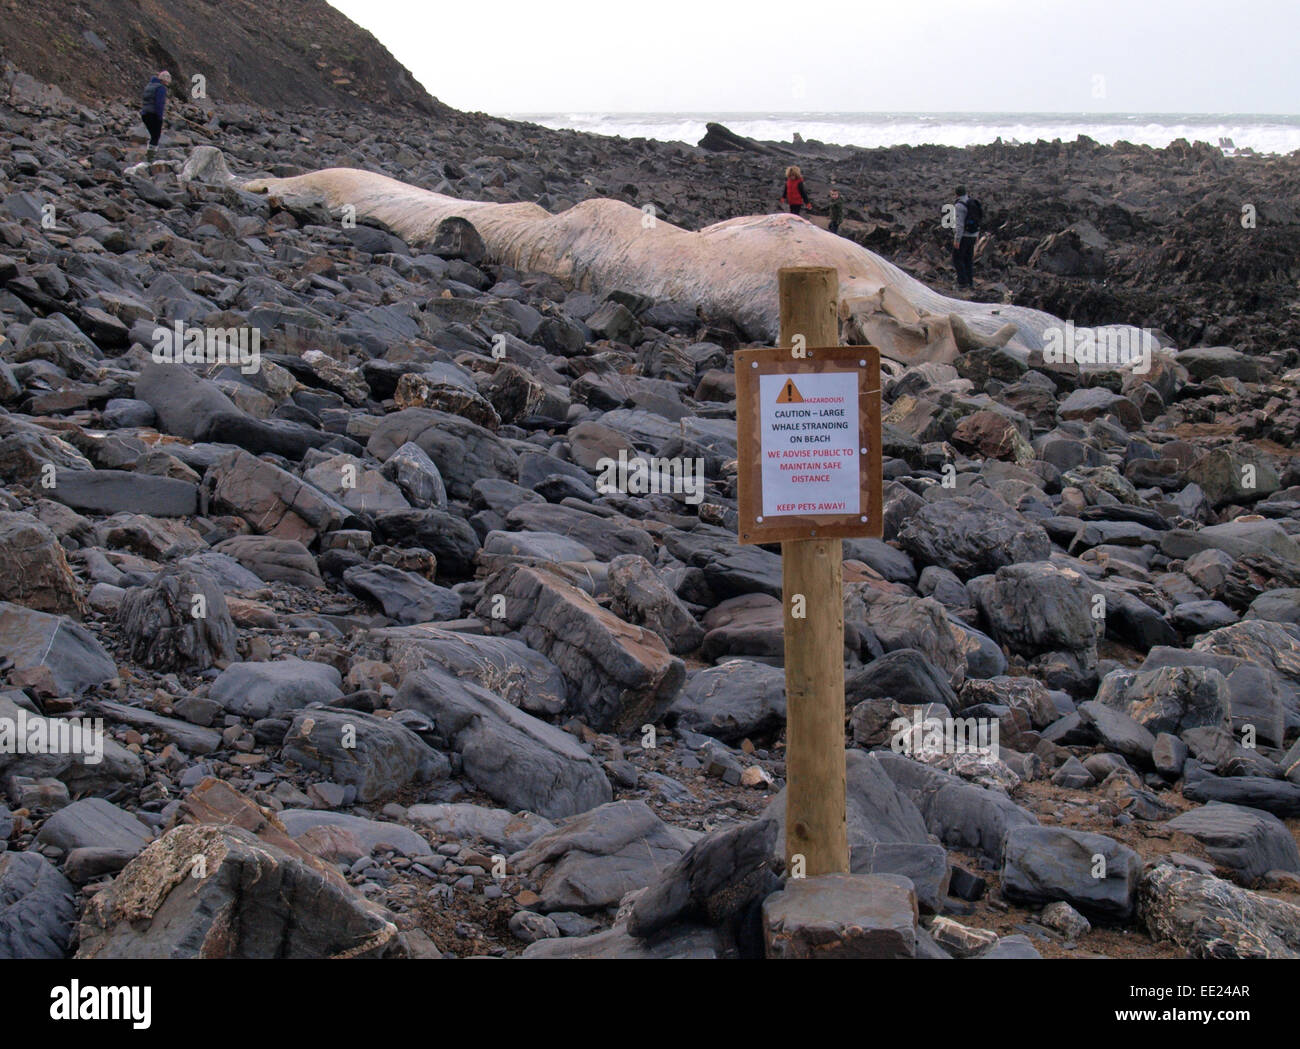 Large remains of a  60-foot long whale  believed to be a fin whale washed at Wanson Mouth beach near Widemouth Bay, Cornwall, UK Stock Photo